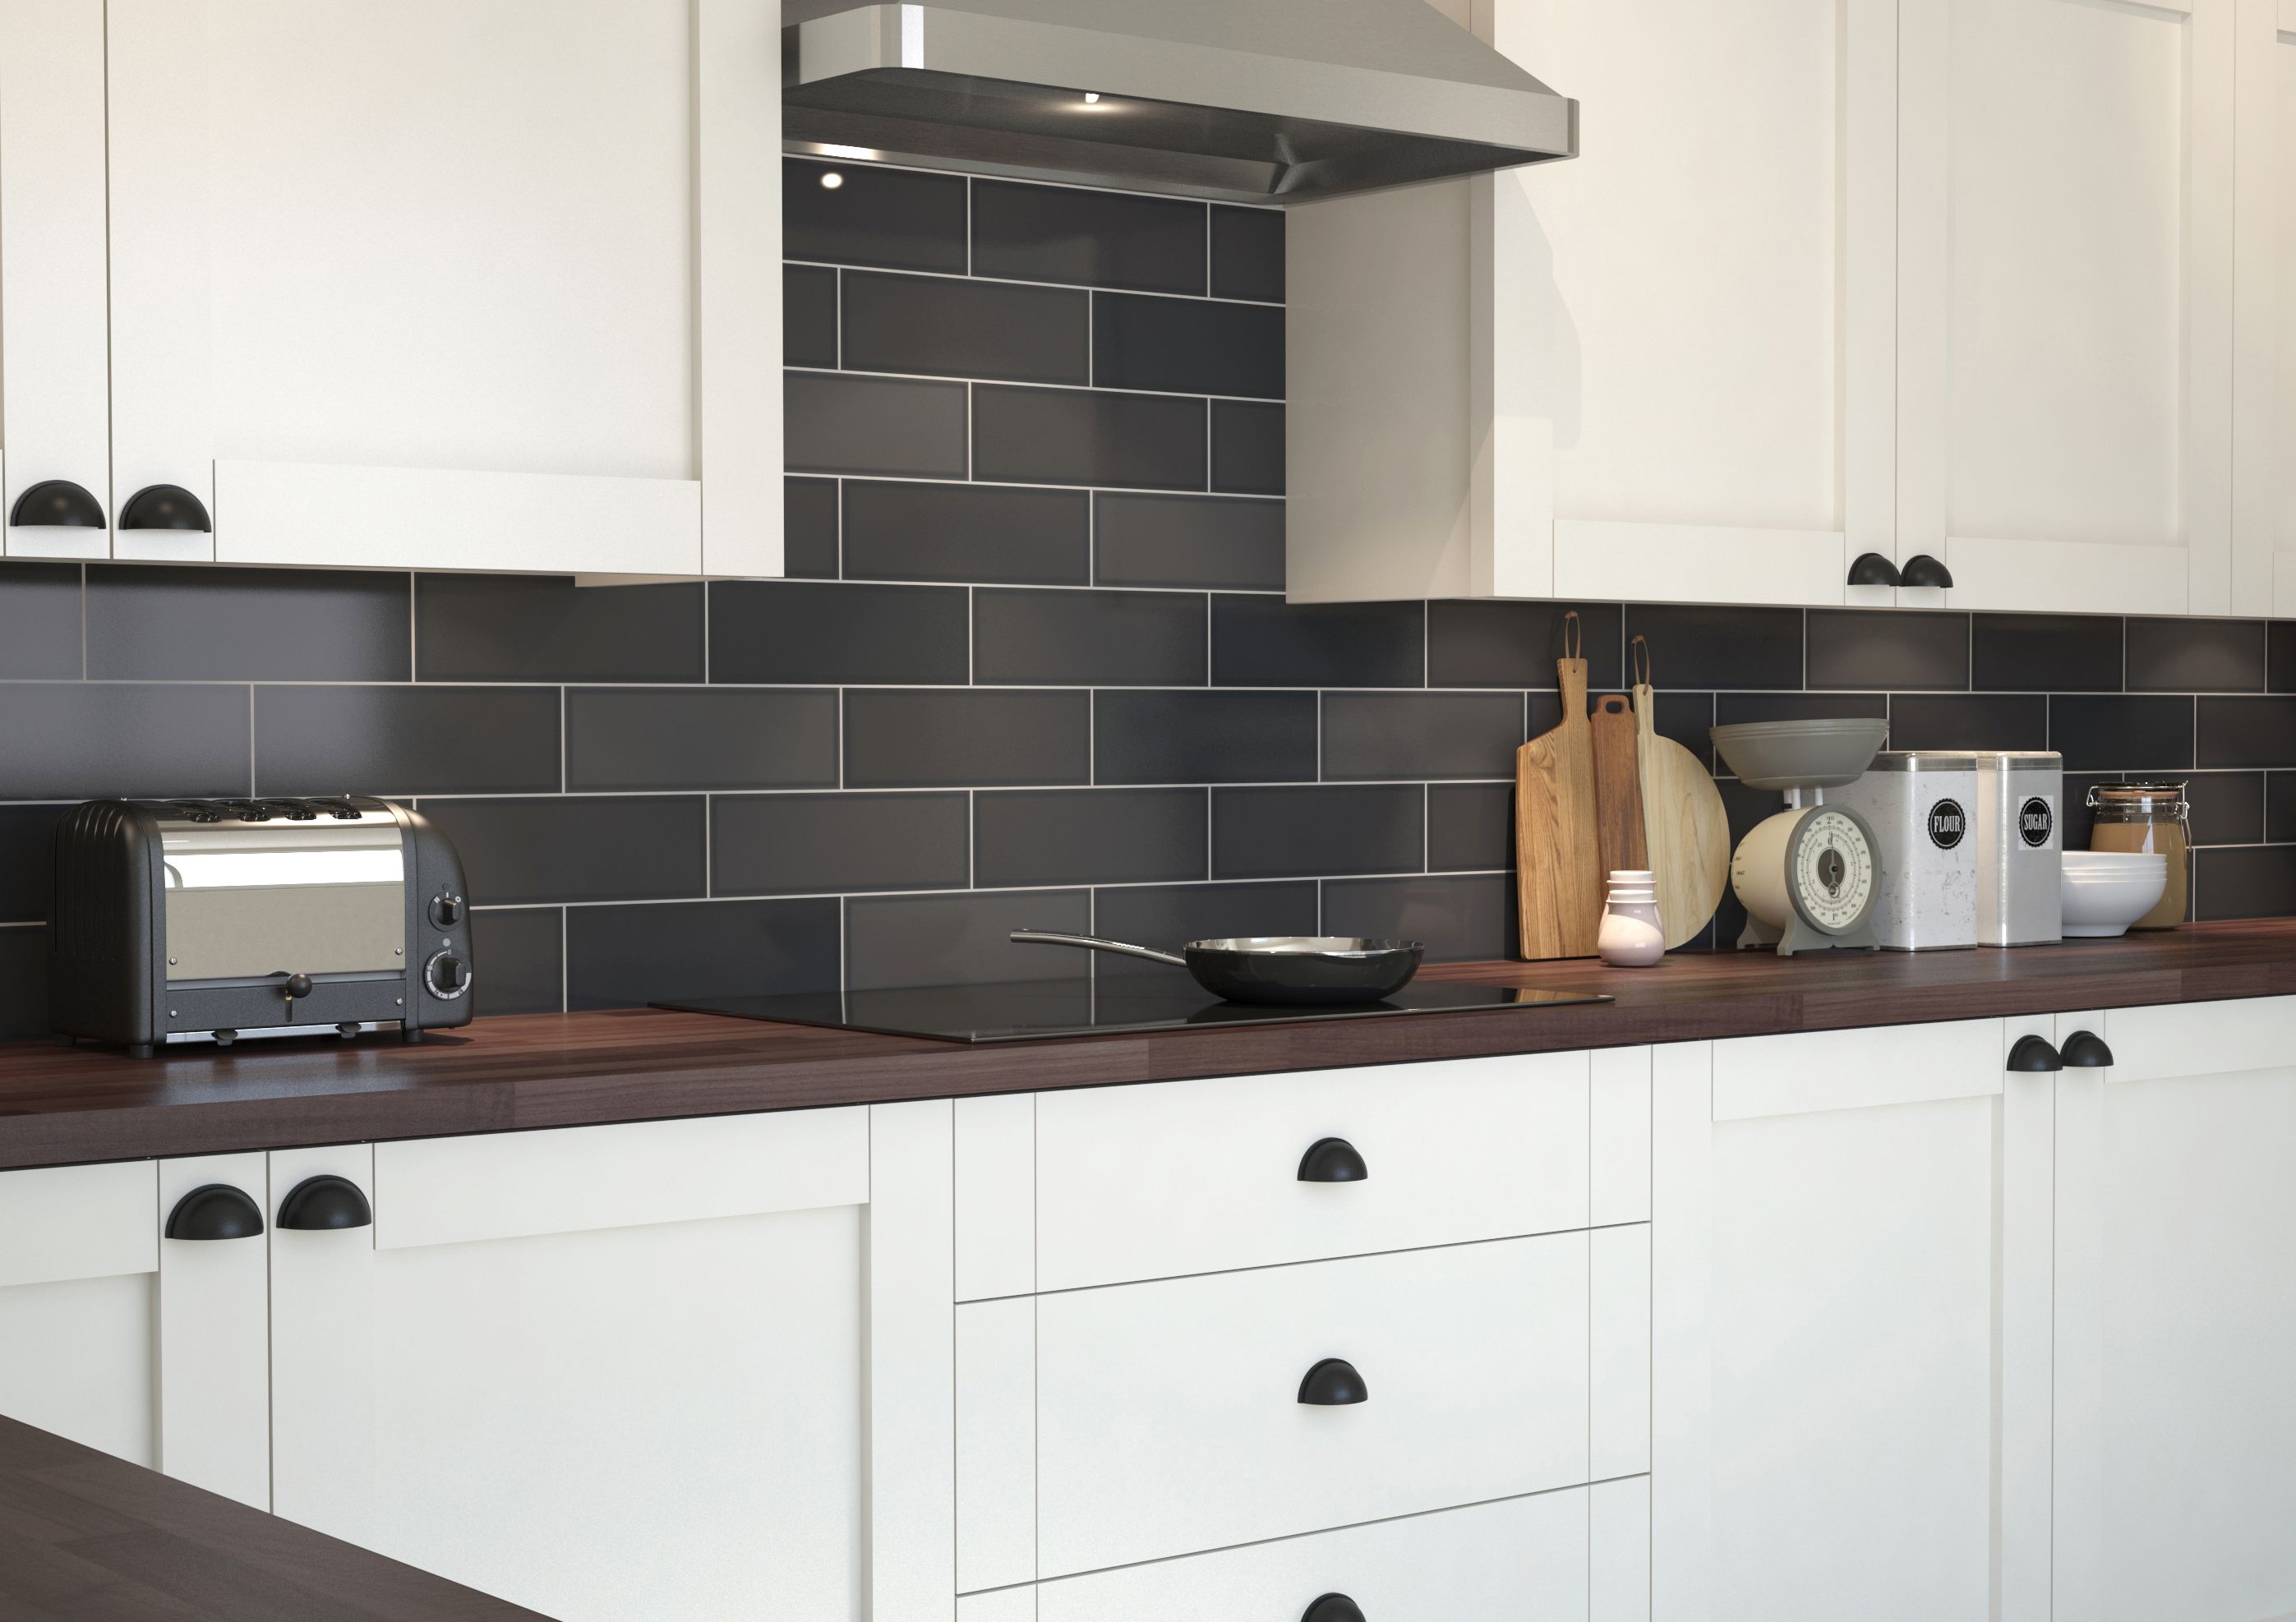 Image of Wickes Soho Carbon Black Ceramic Wall Tile - 300 x 100mm